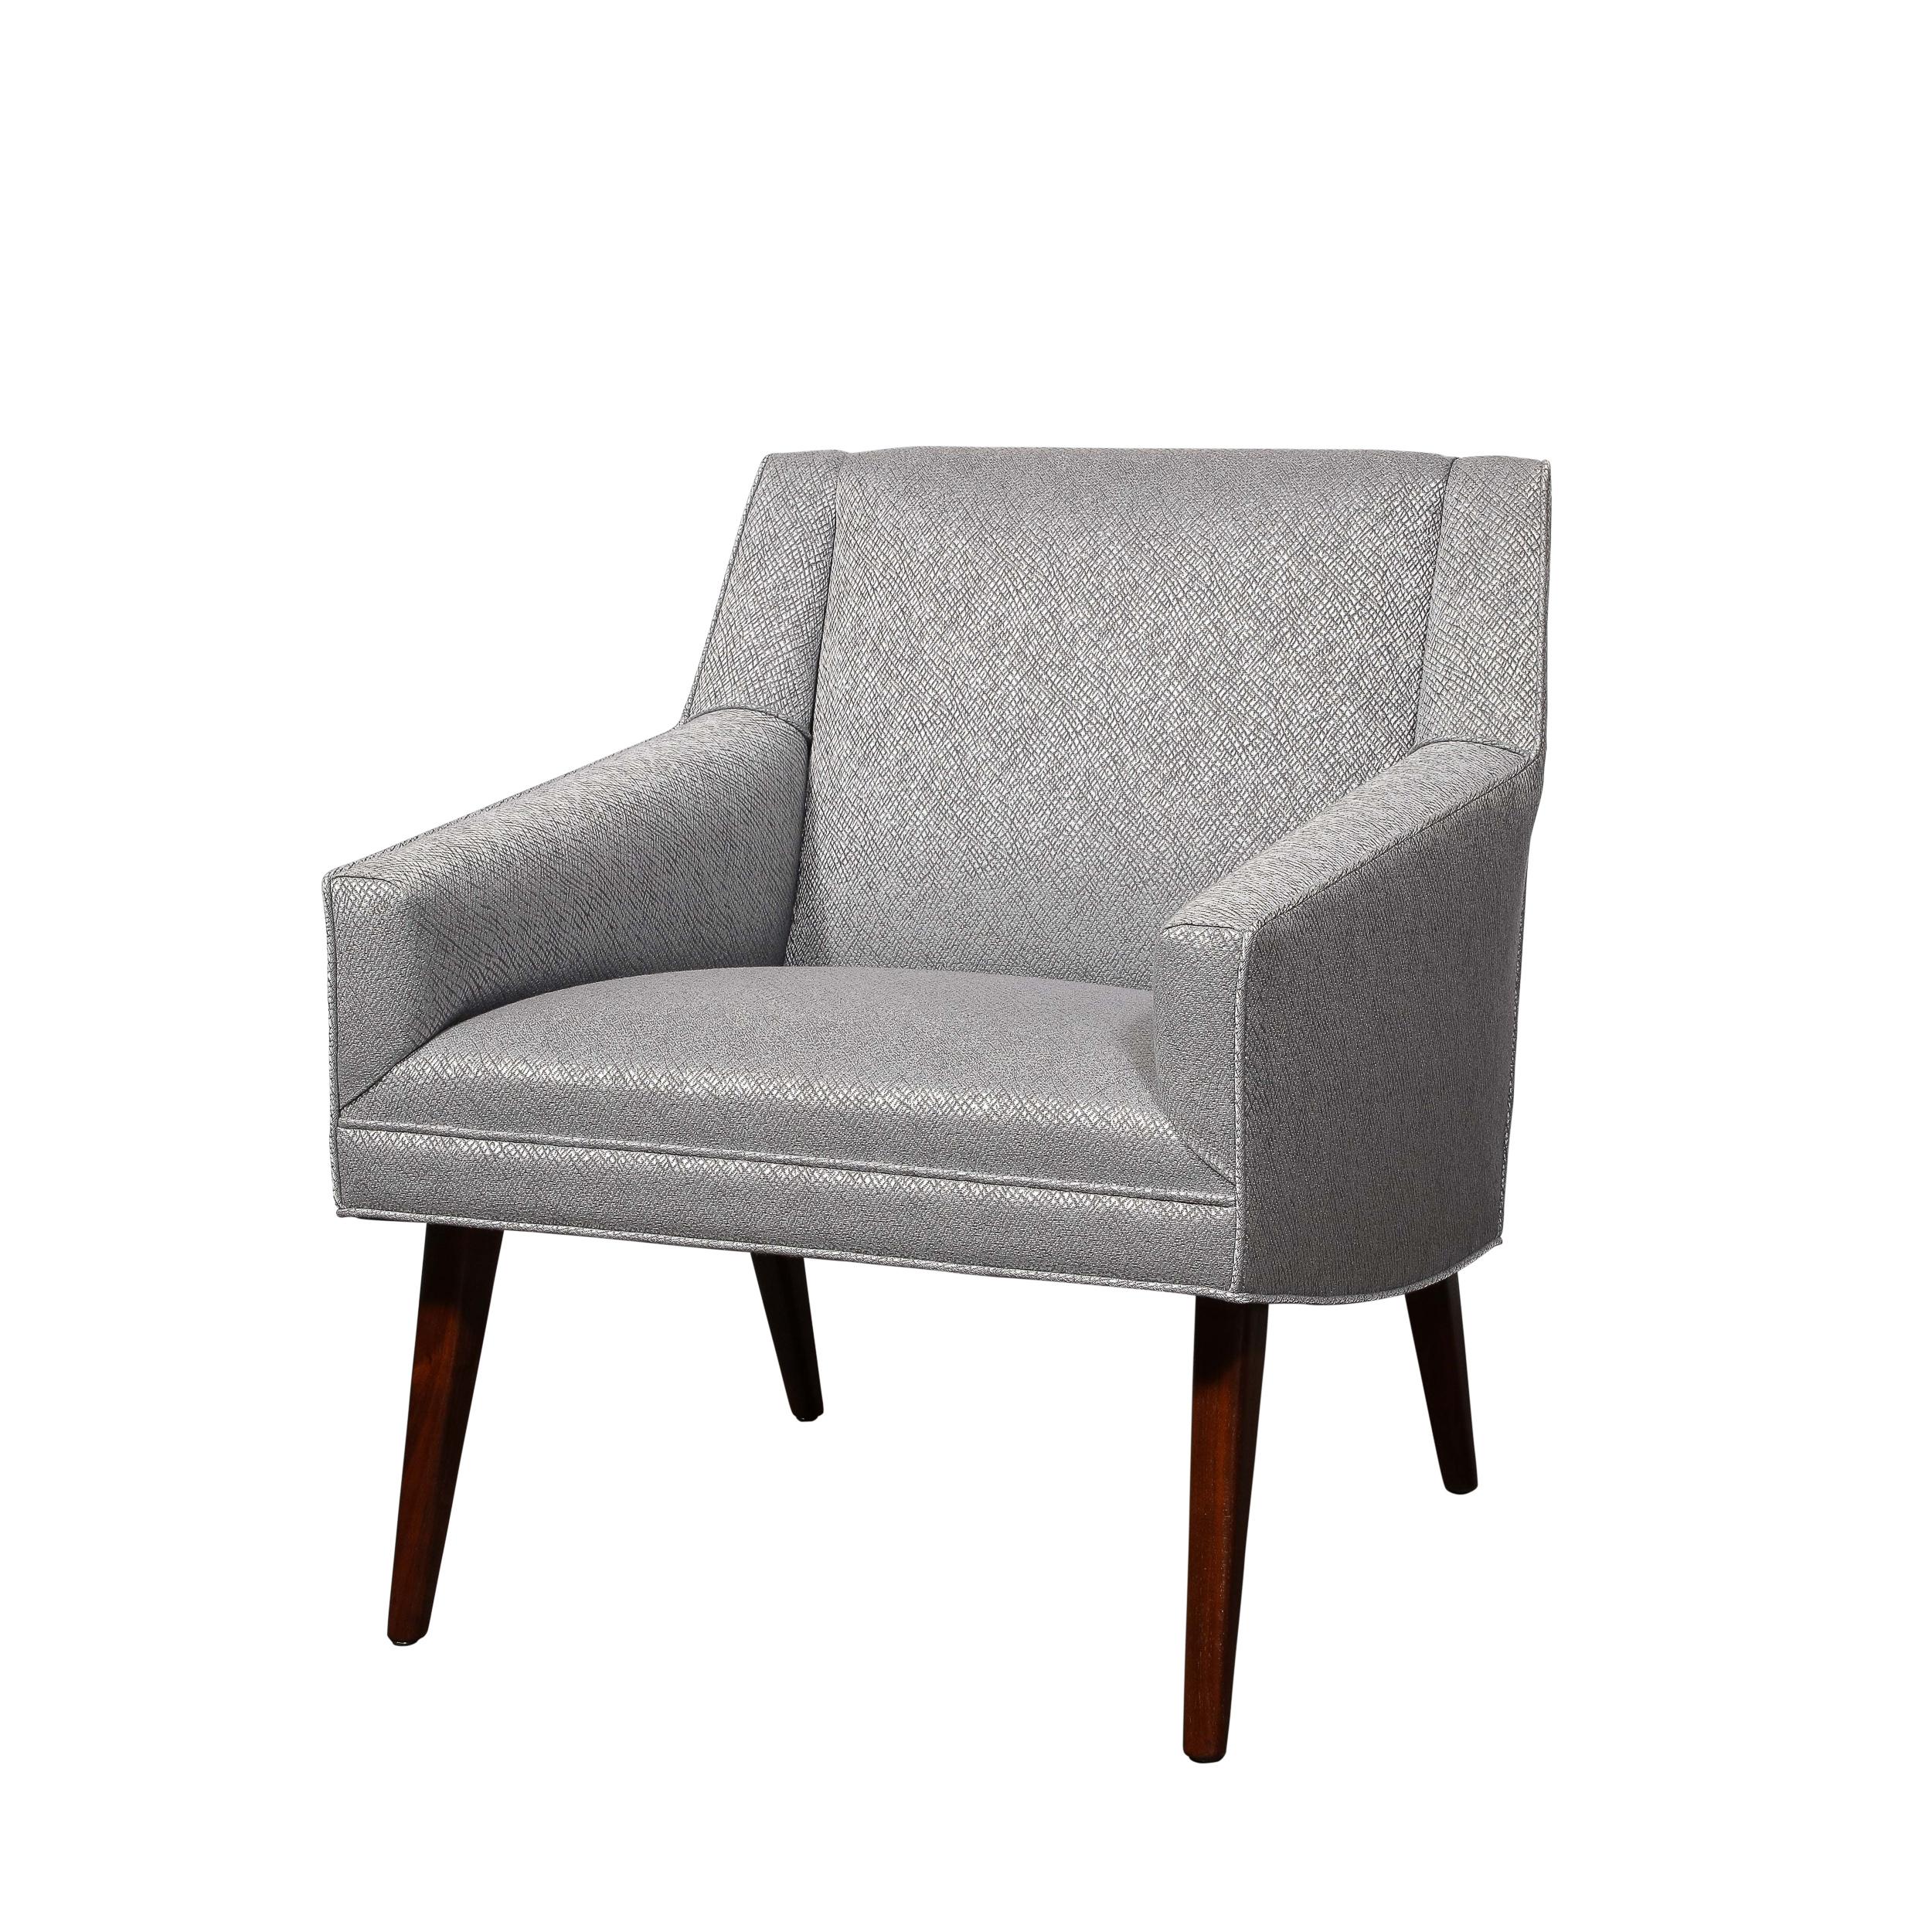 This pair of striking Mid-Century Modernist Lounge Chairs date back to 1960, originating from Denmark. The chairs are beautifully upholstered in a textured silver holly hunt fabric that smoothly contrasts the minimal geometric profile. Versatile and